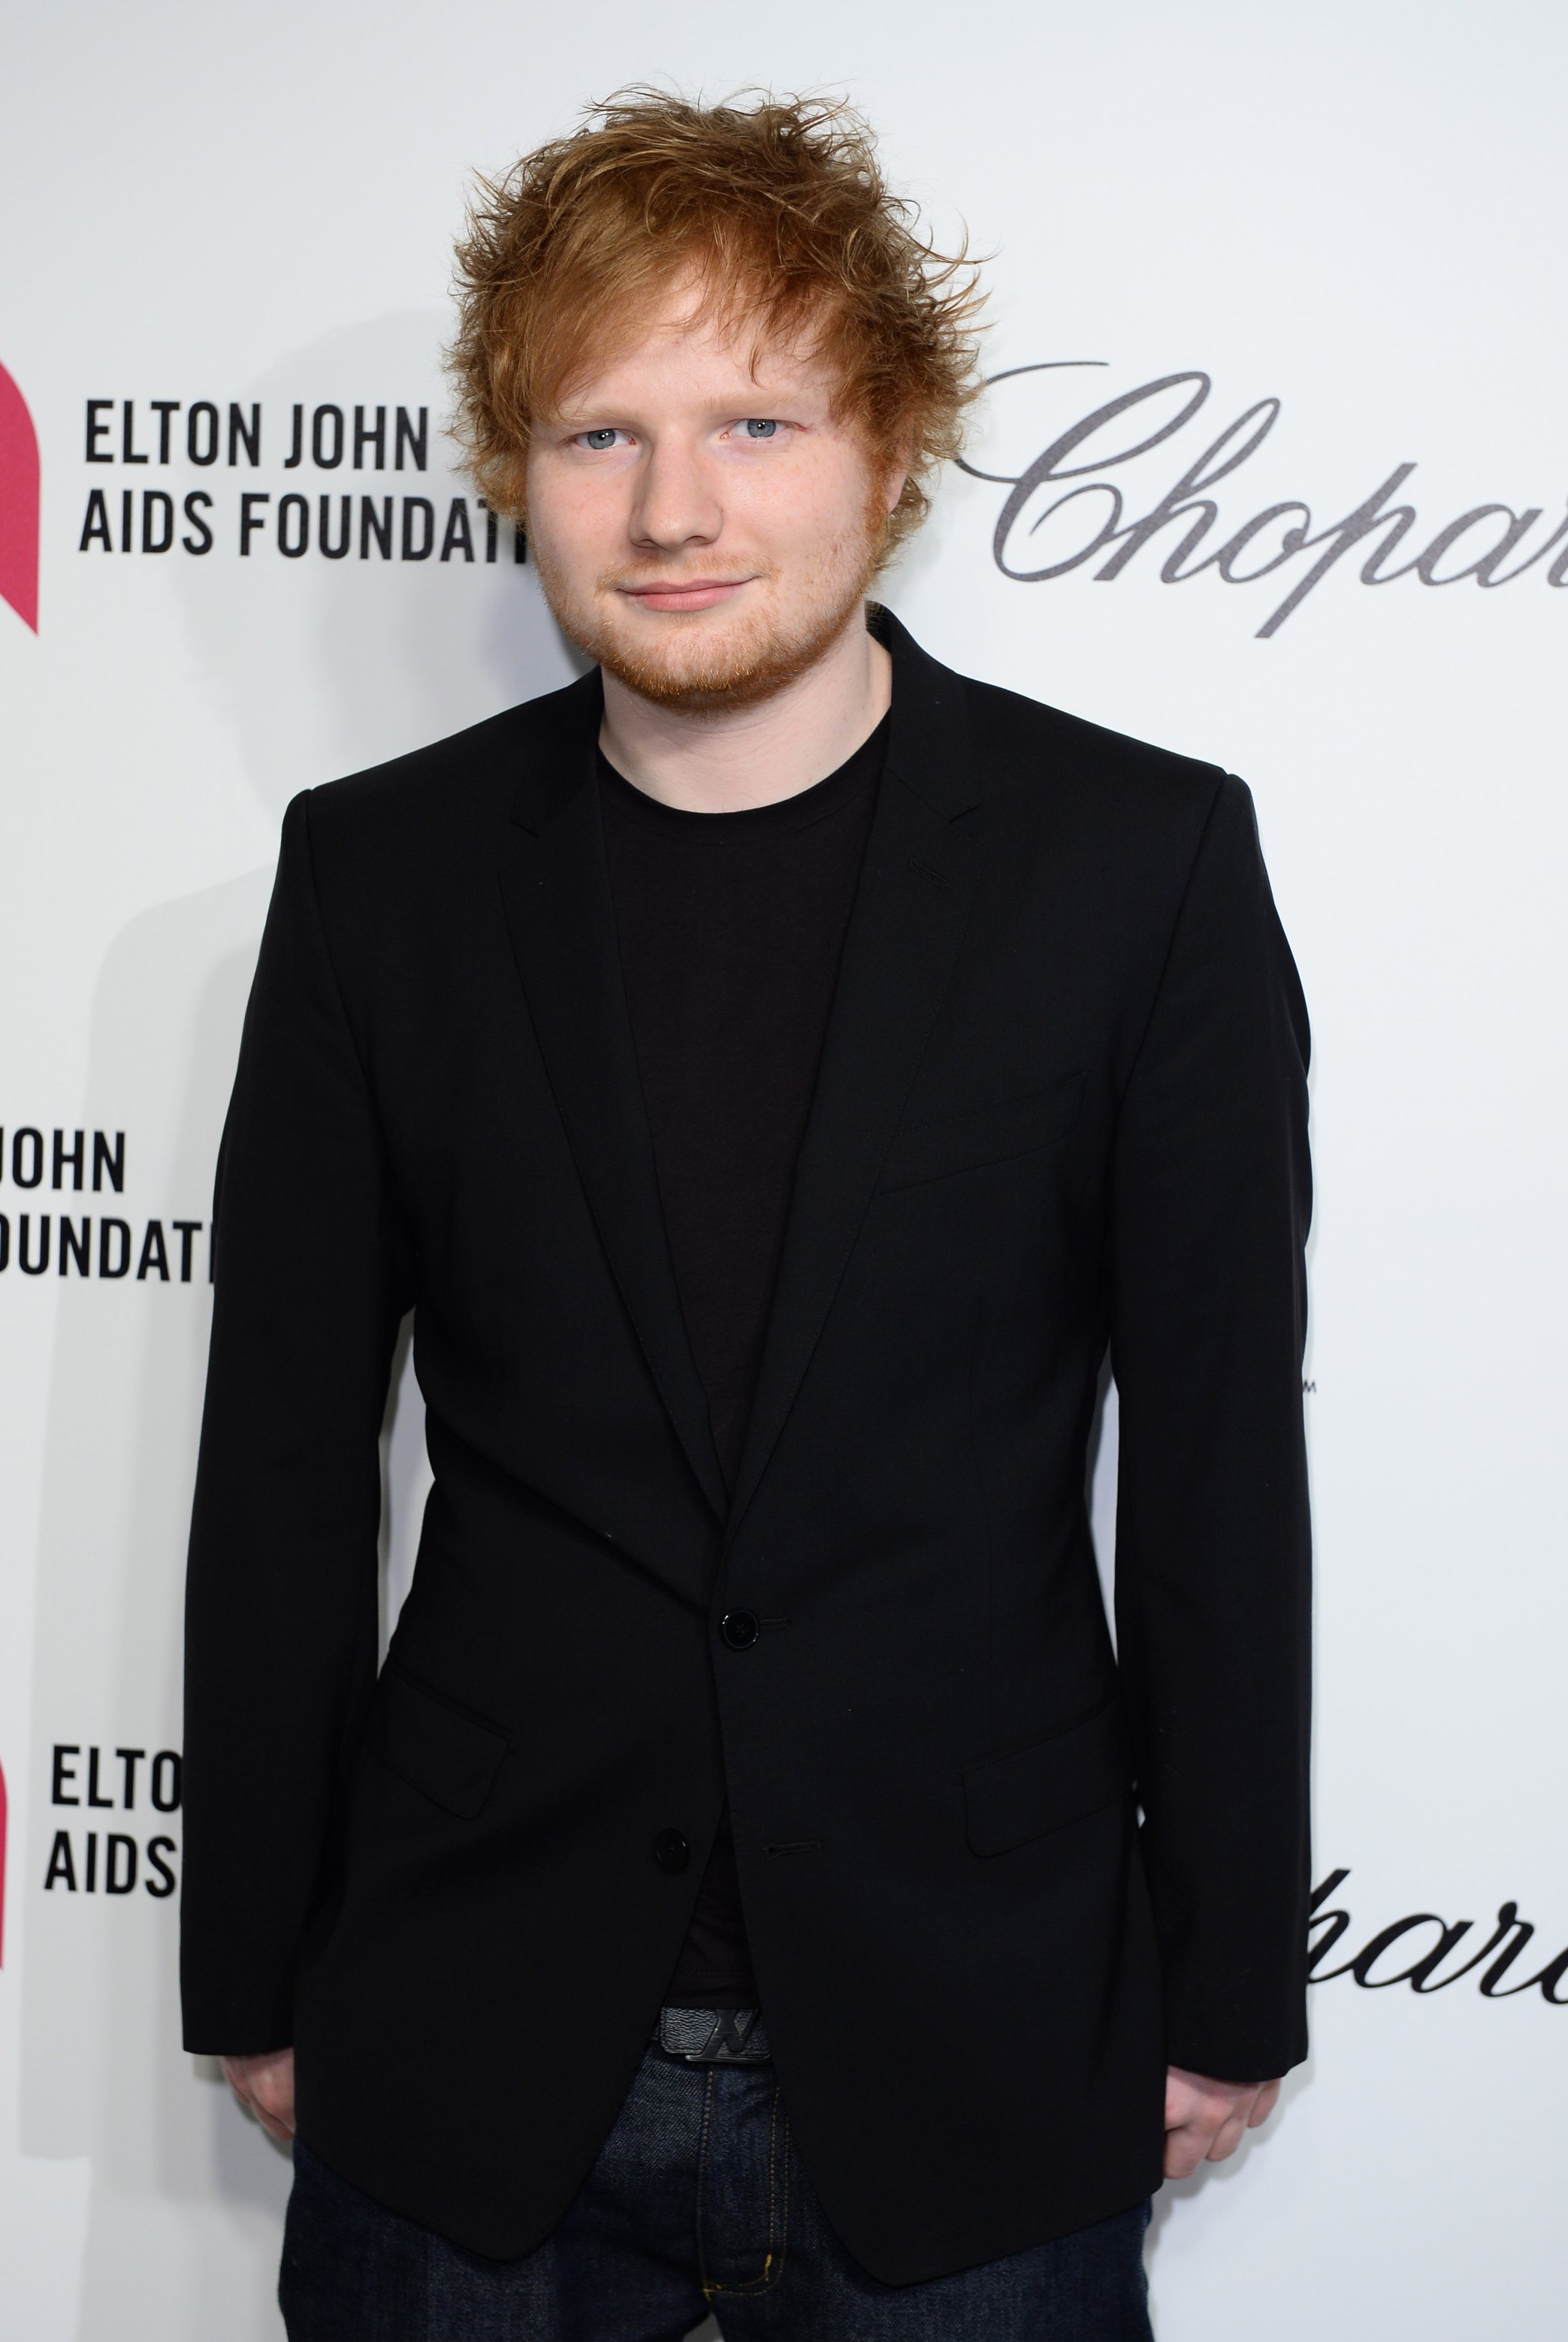 22nd Annual Elton John AIDS Foundation's Oscar Viewing Party - Arrivals